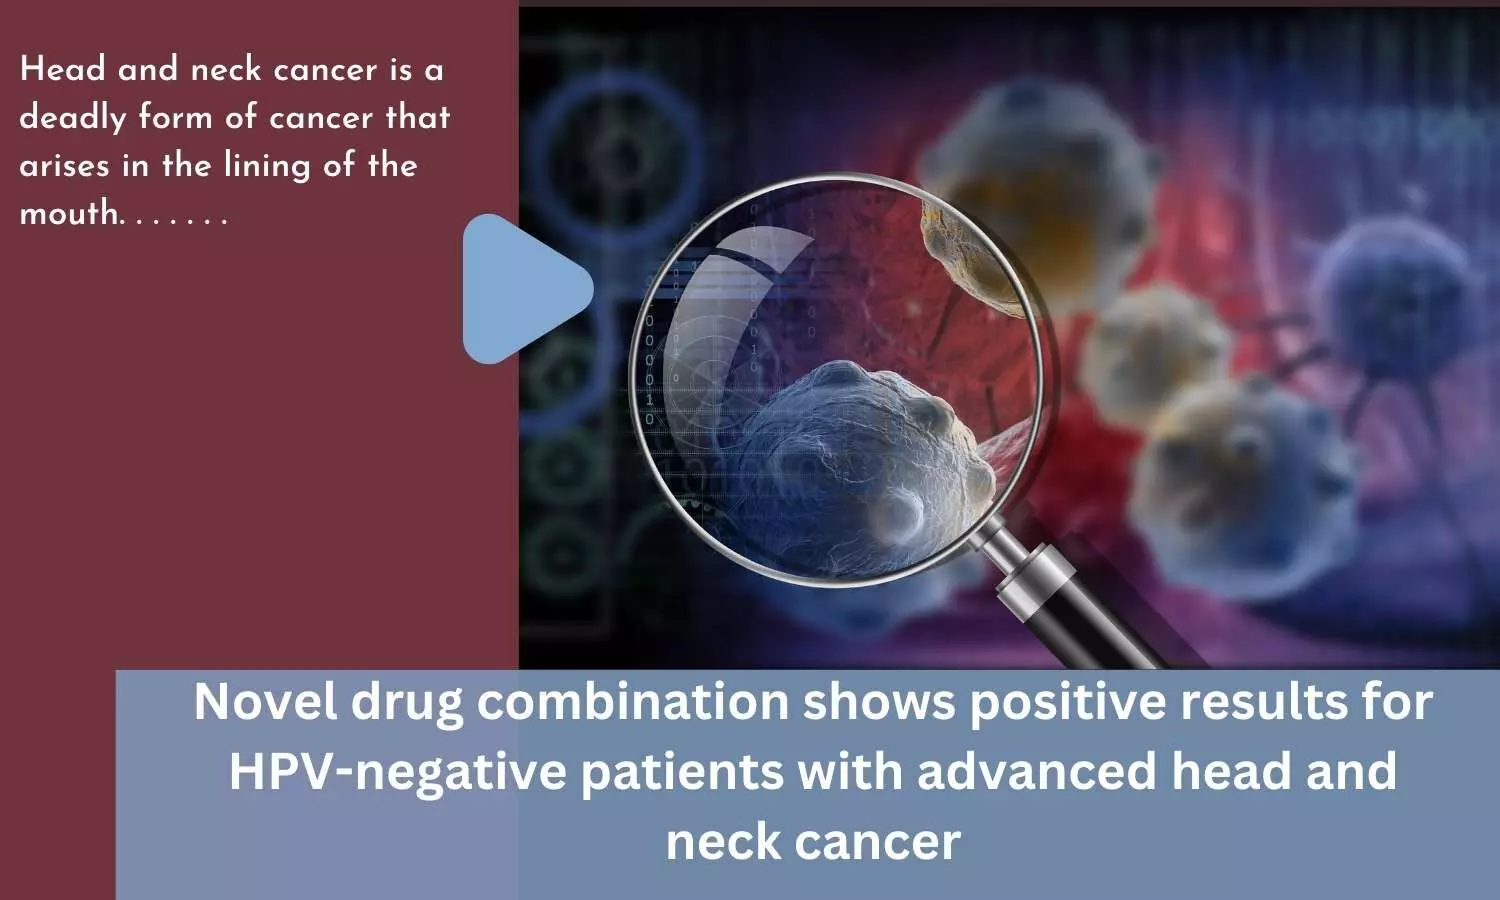 Novel drug combination shows positive results for HPV-negative patients with advanced head and neck cancer